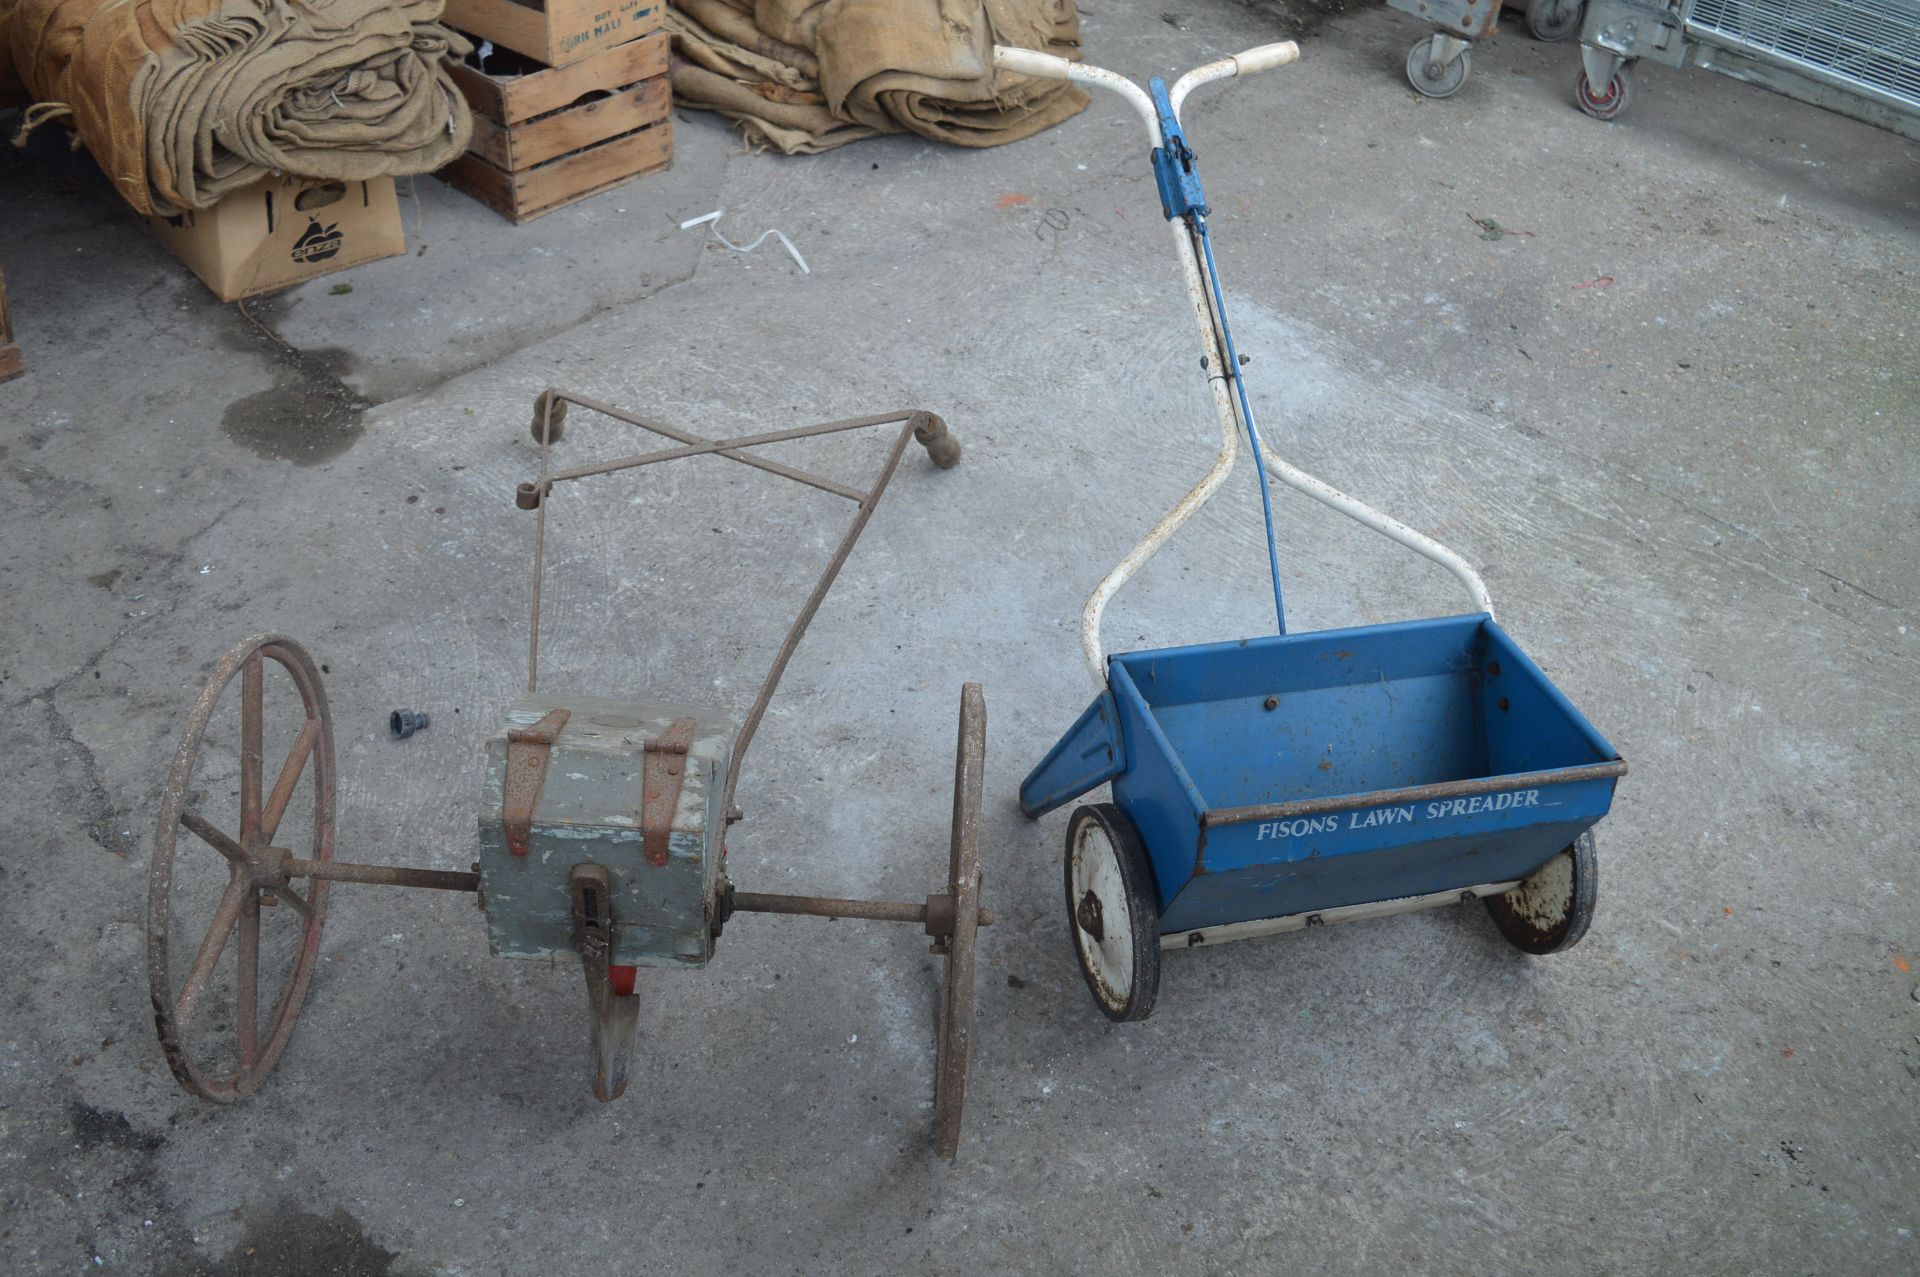 Vintage Seed Drill and a Fisons Lawn Spreader